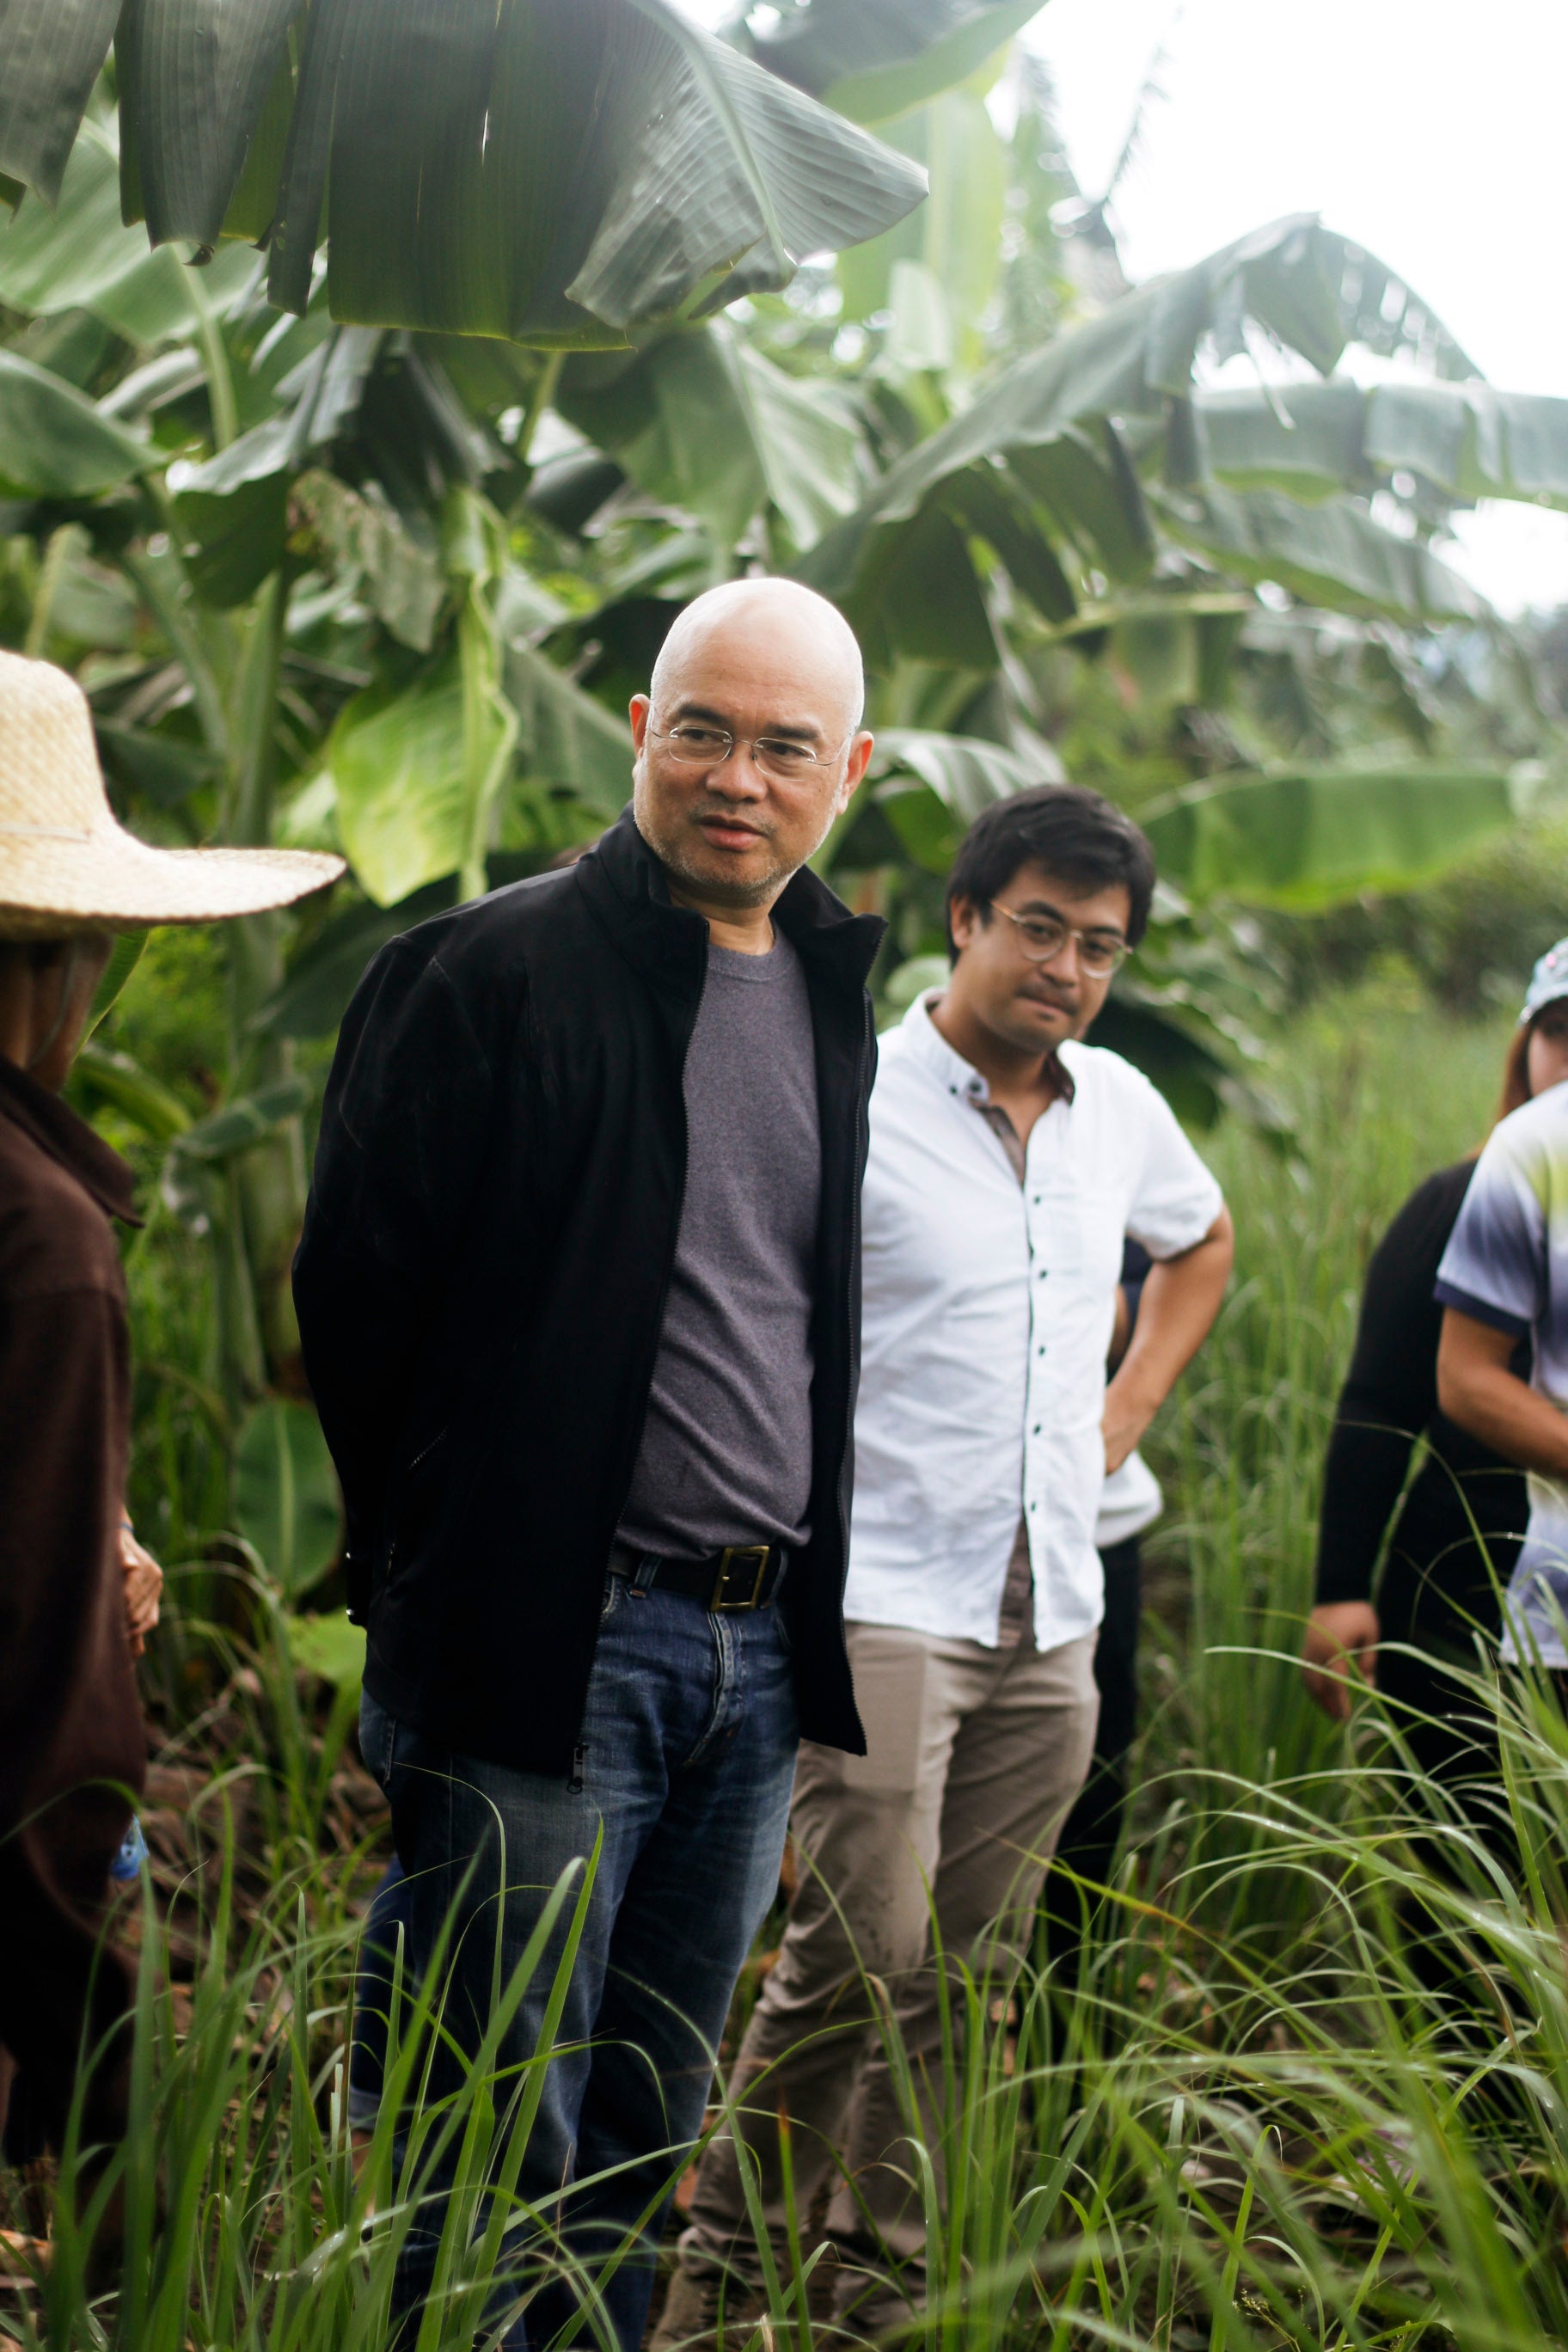 Steve Benitez, CEO and Founder of Bo's Coffee together with Jamir Ocampo, Founder of Tsaa Laya at the Calauan Tea Village.